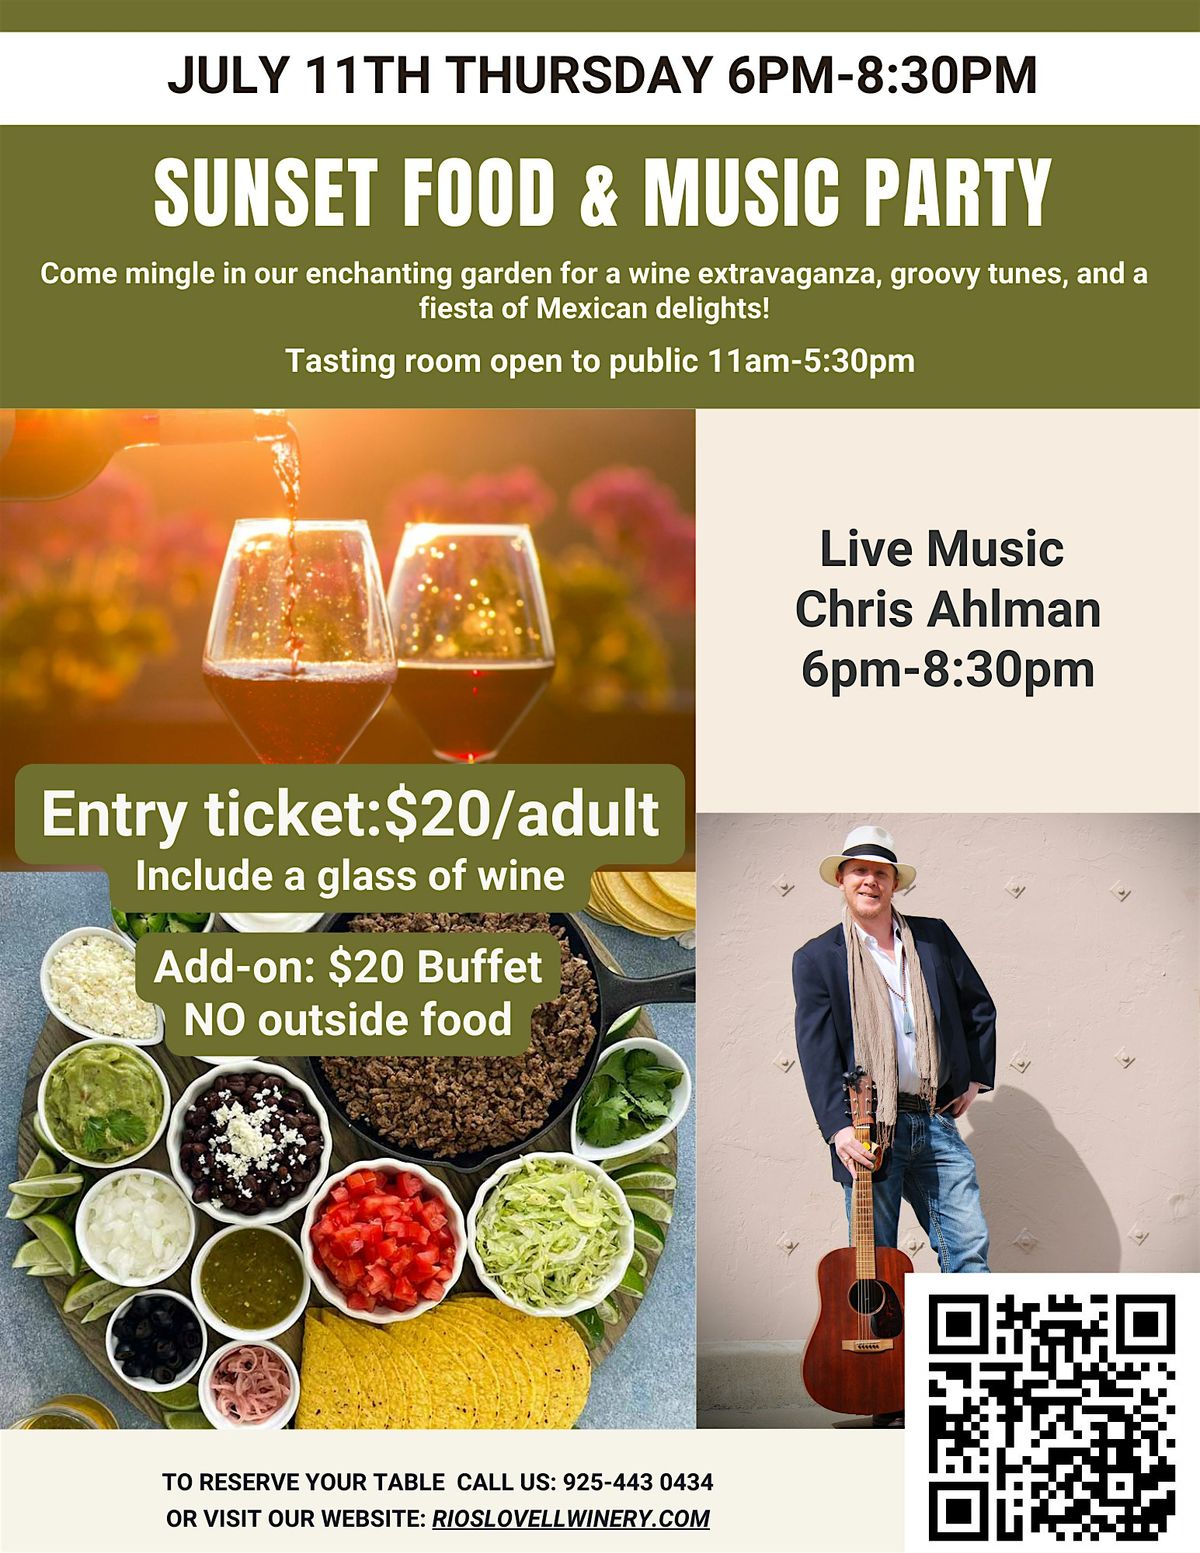 Thursday sunset music and food party at Rios Lovell Winery